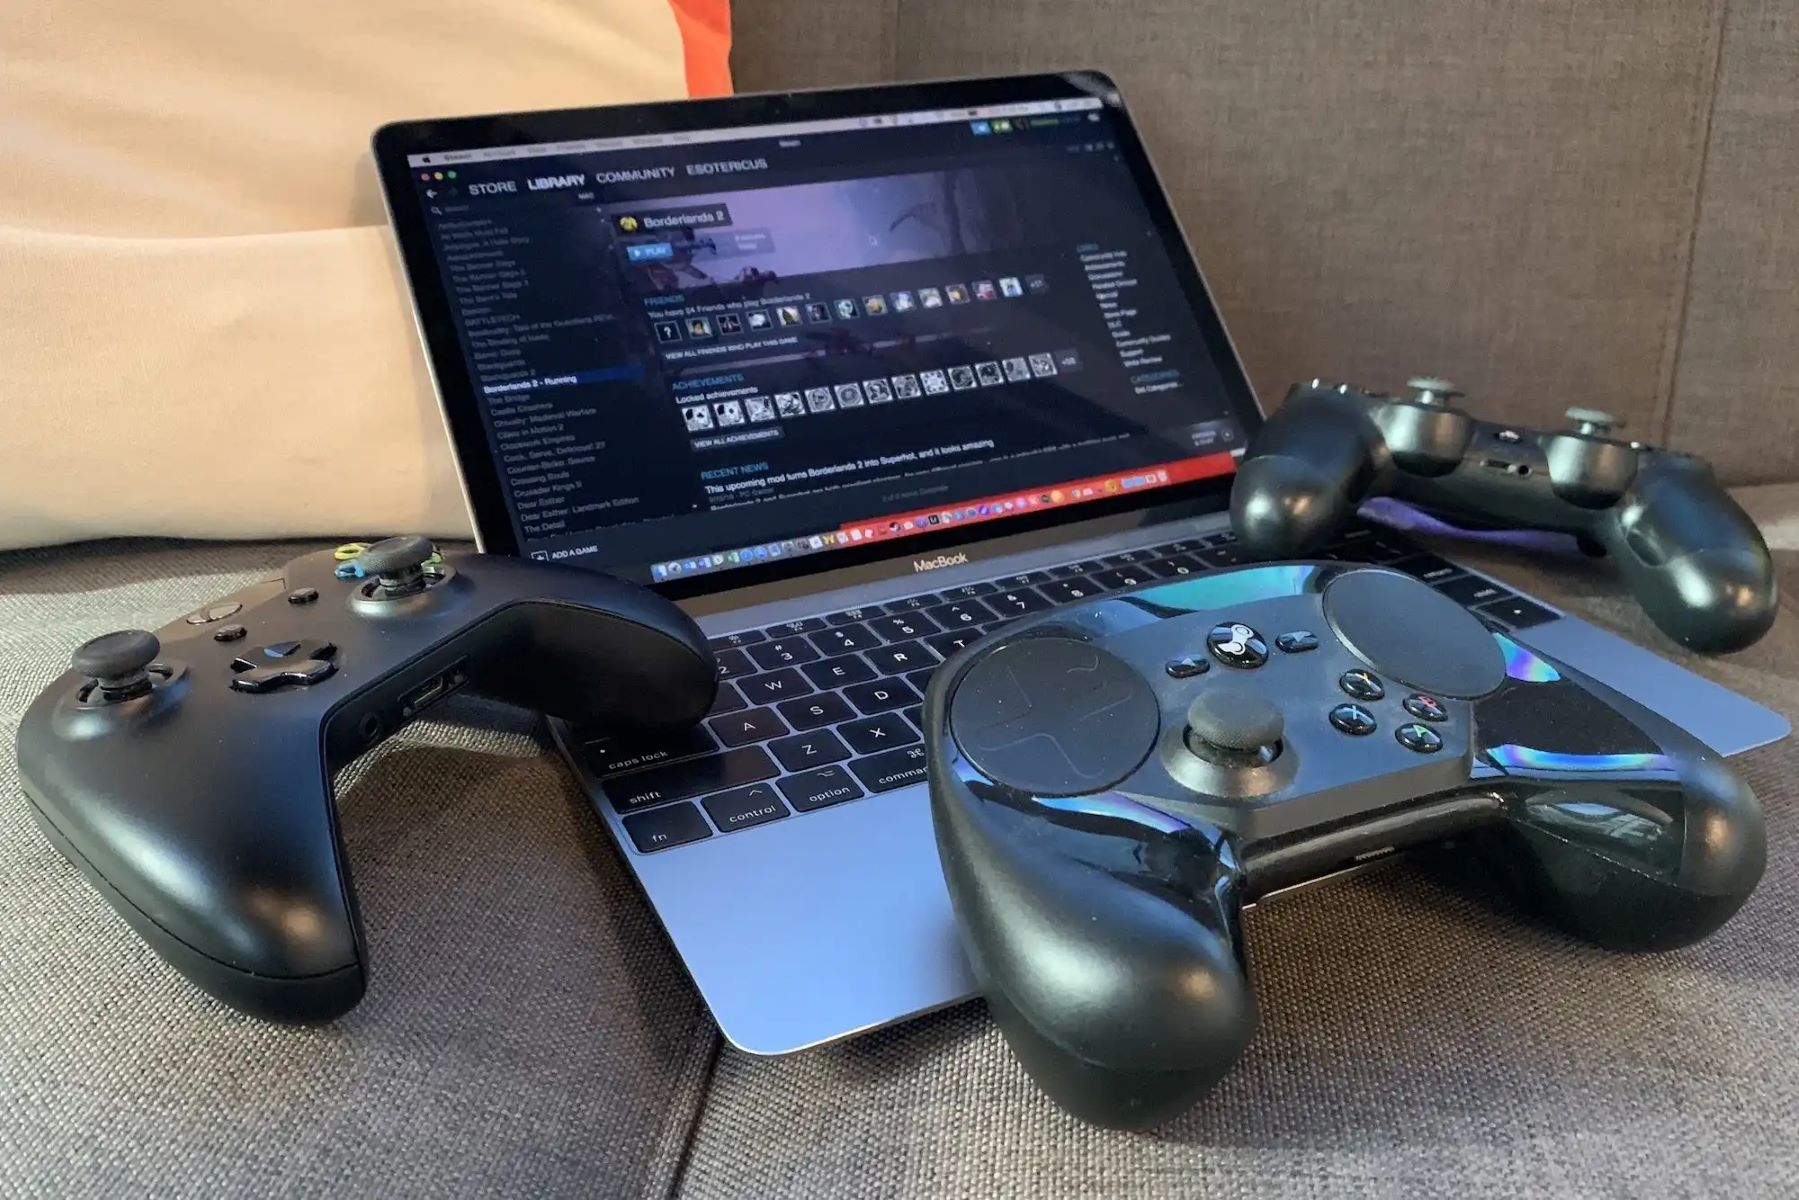 How To Plug And Play A Game Controller On A Macbook Pro